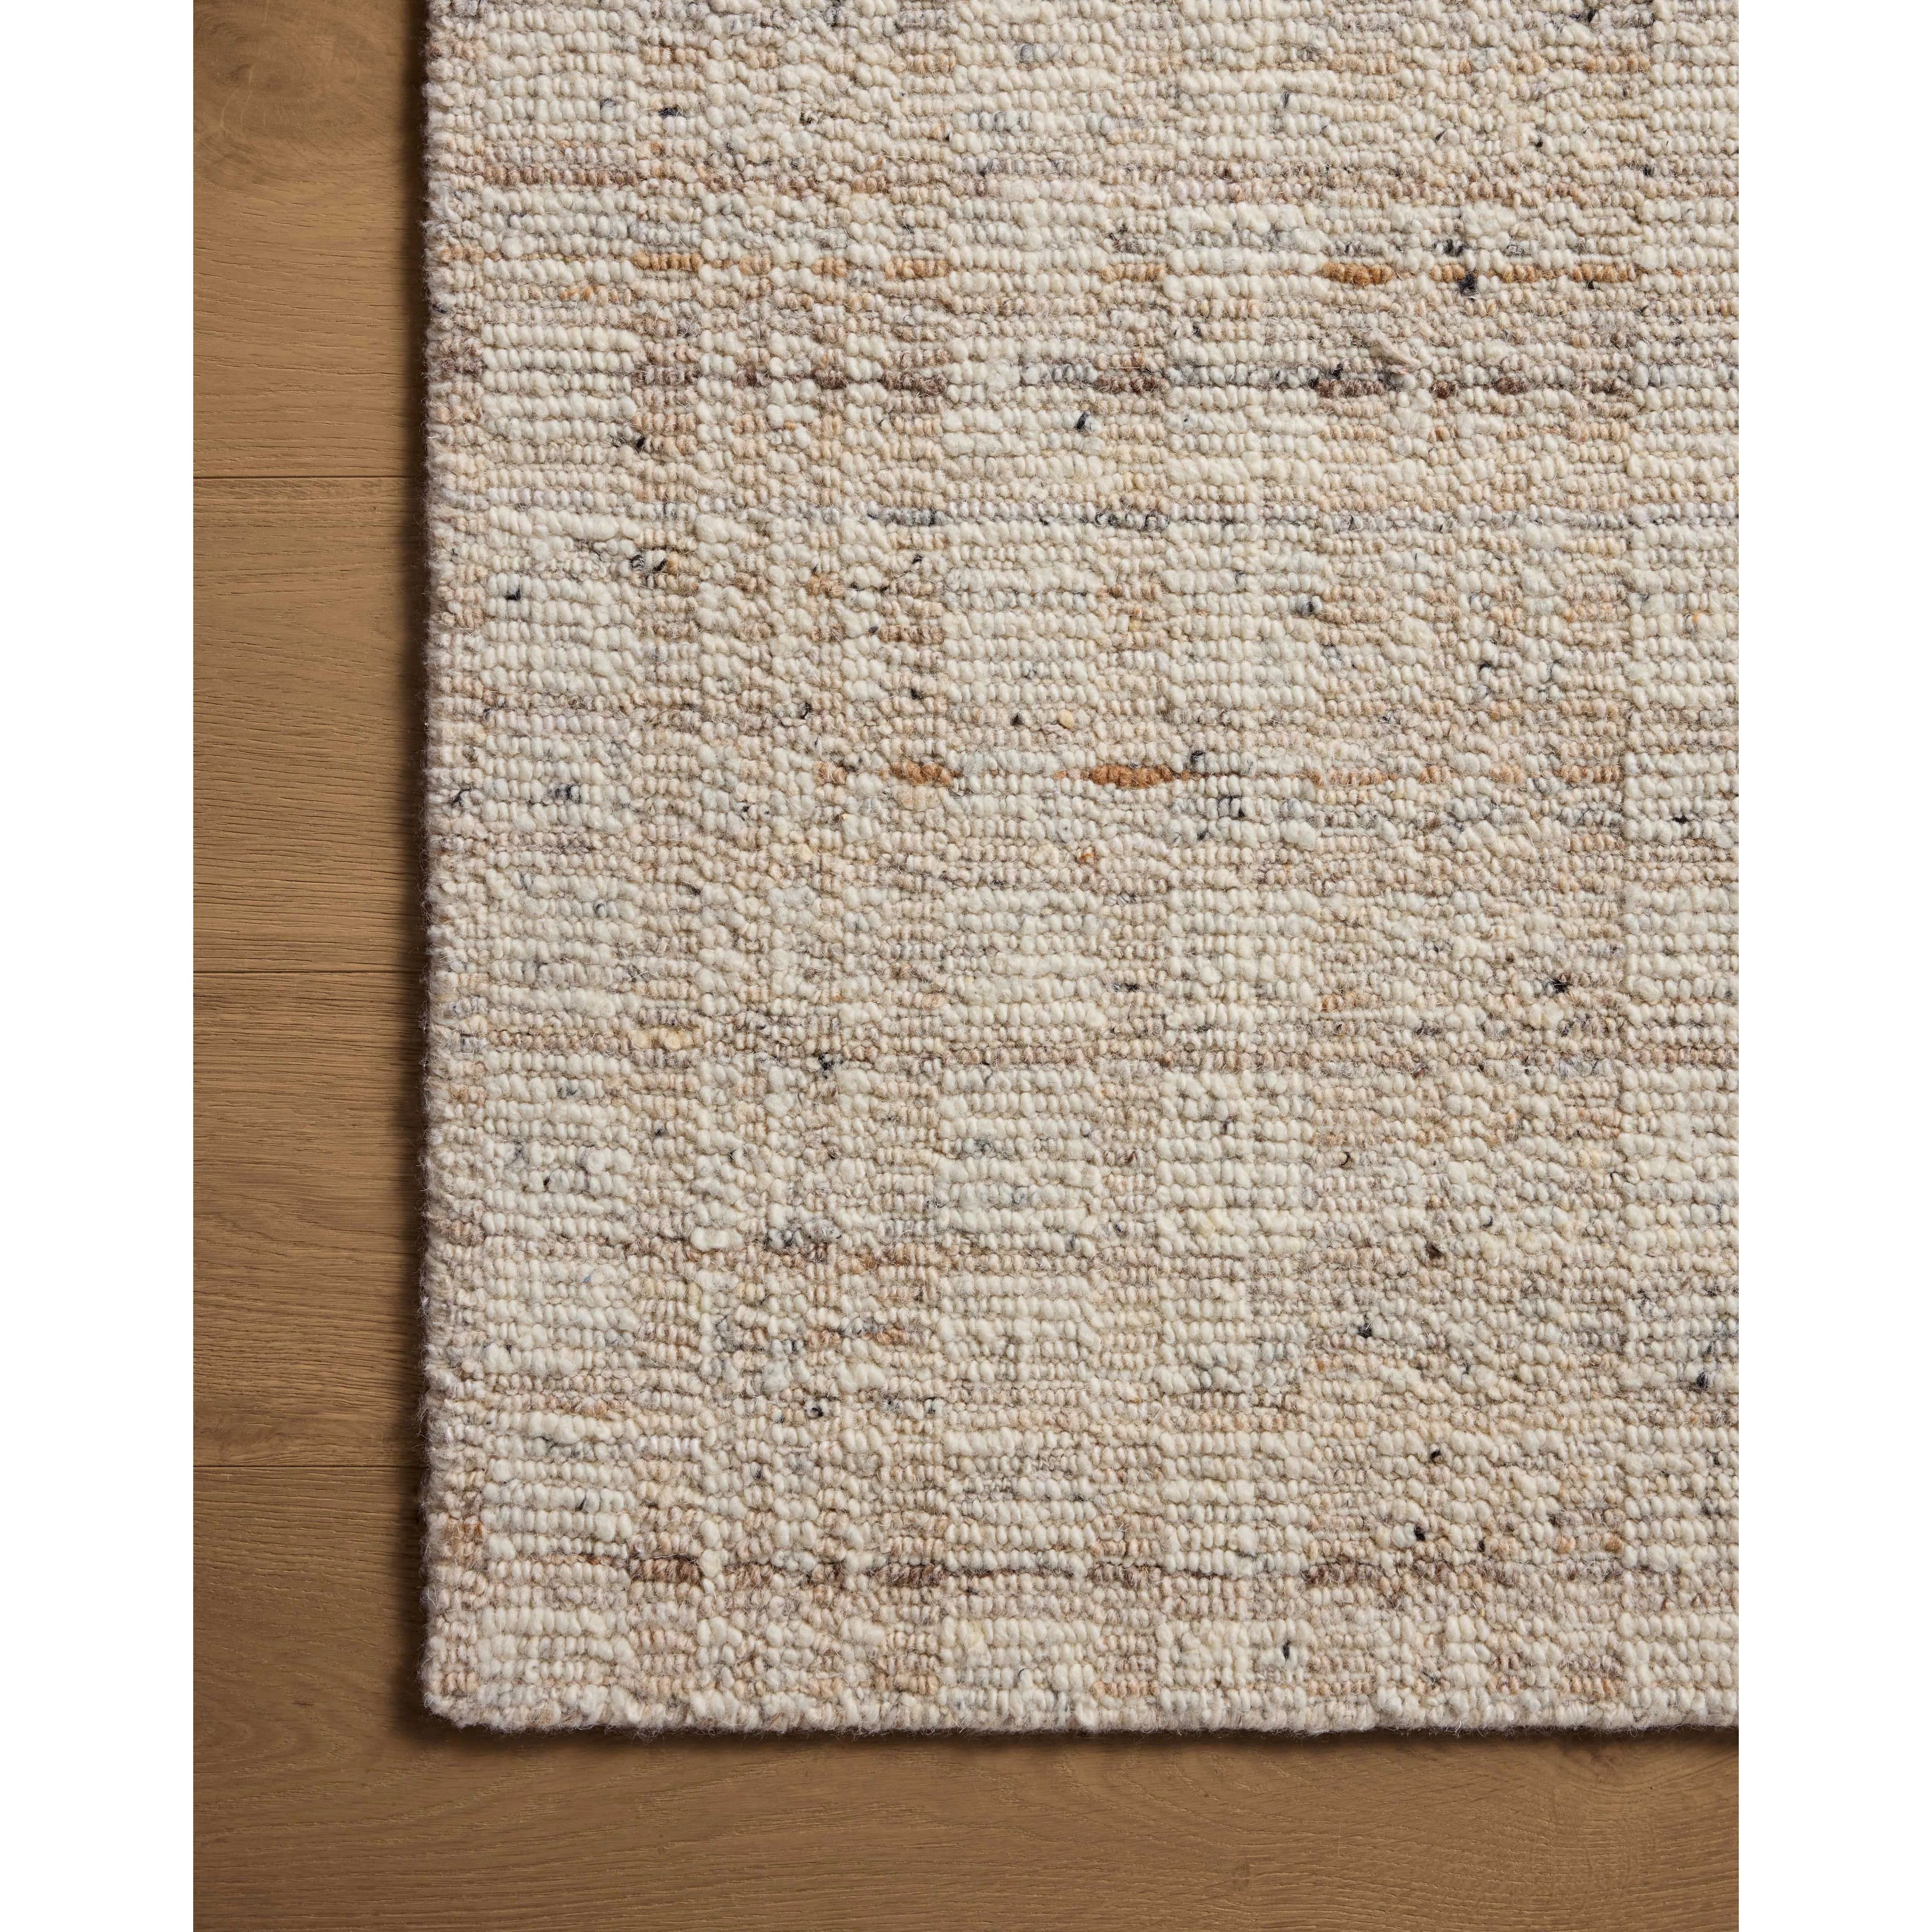 The Sonya Ivory / Natural Rug is a hand-loomed area rug with a light, airy palette and understated graphic design. The rug’s textural pile is a soft blend of wool and nylon that creates dimension in living rooms, bedrooms, and more. Amethyst Home provides interior design, new home construction design consulting, vintage area rugs, and lighting in the Monterey metro area.